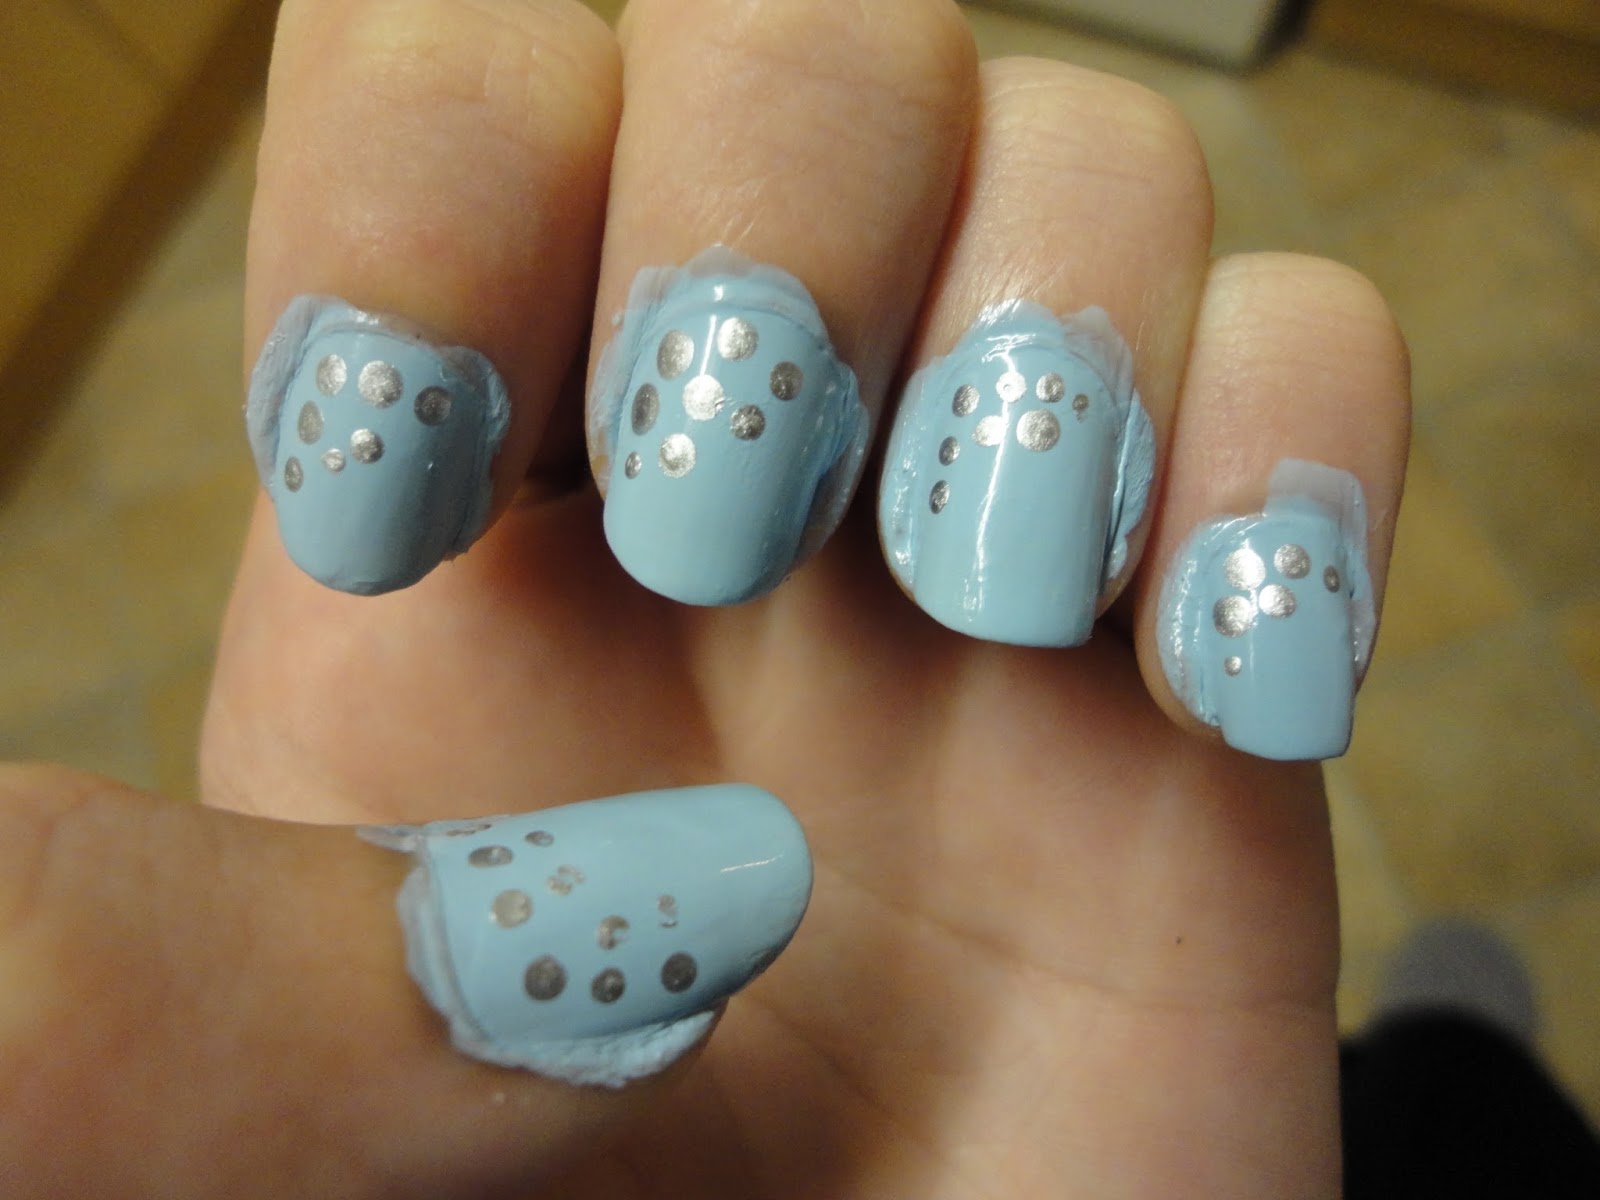 2. Middle Dot Nail Art - wide 5